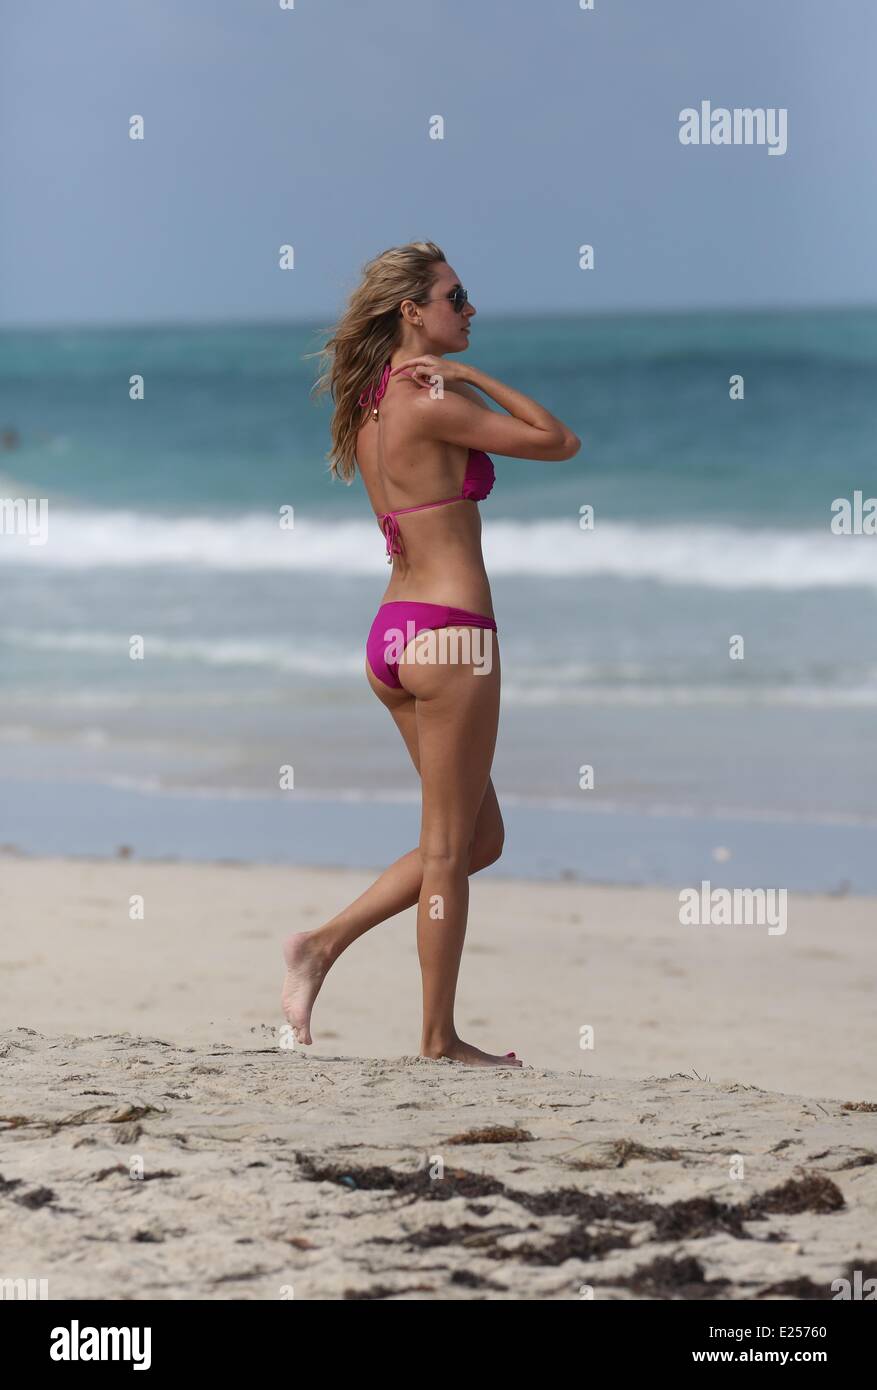 Skimpy And Beach High Resolution Stock Photography and Images - Alamy